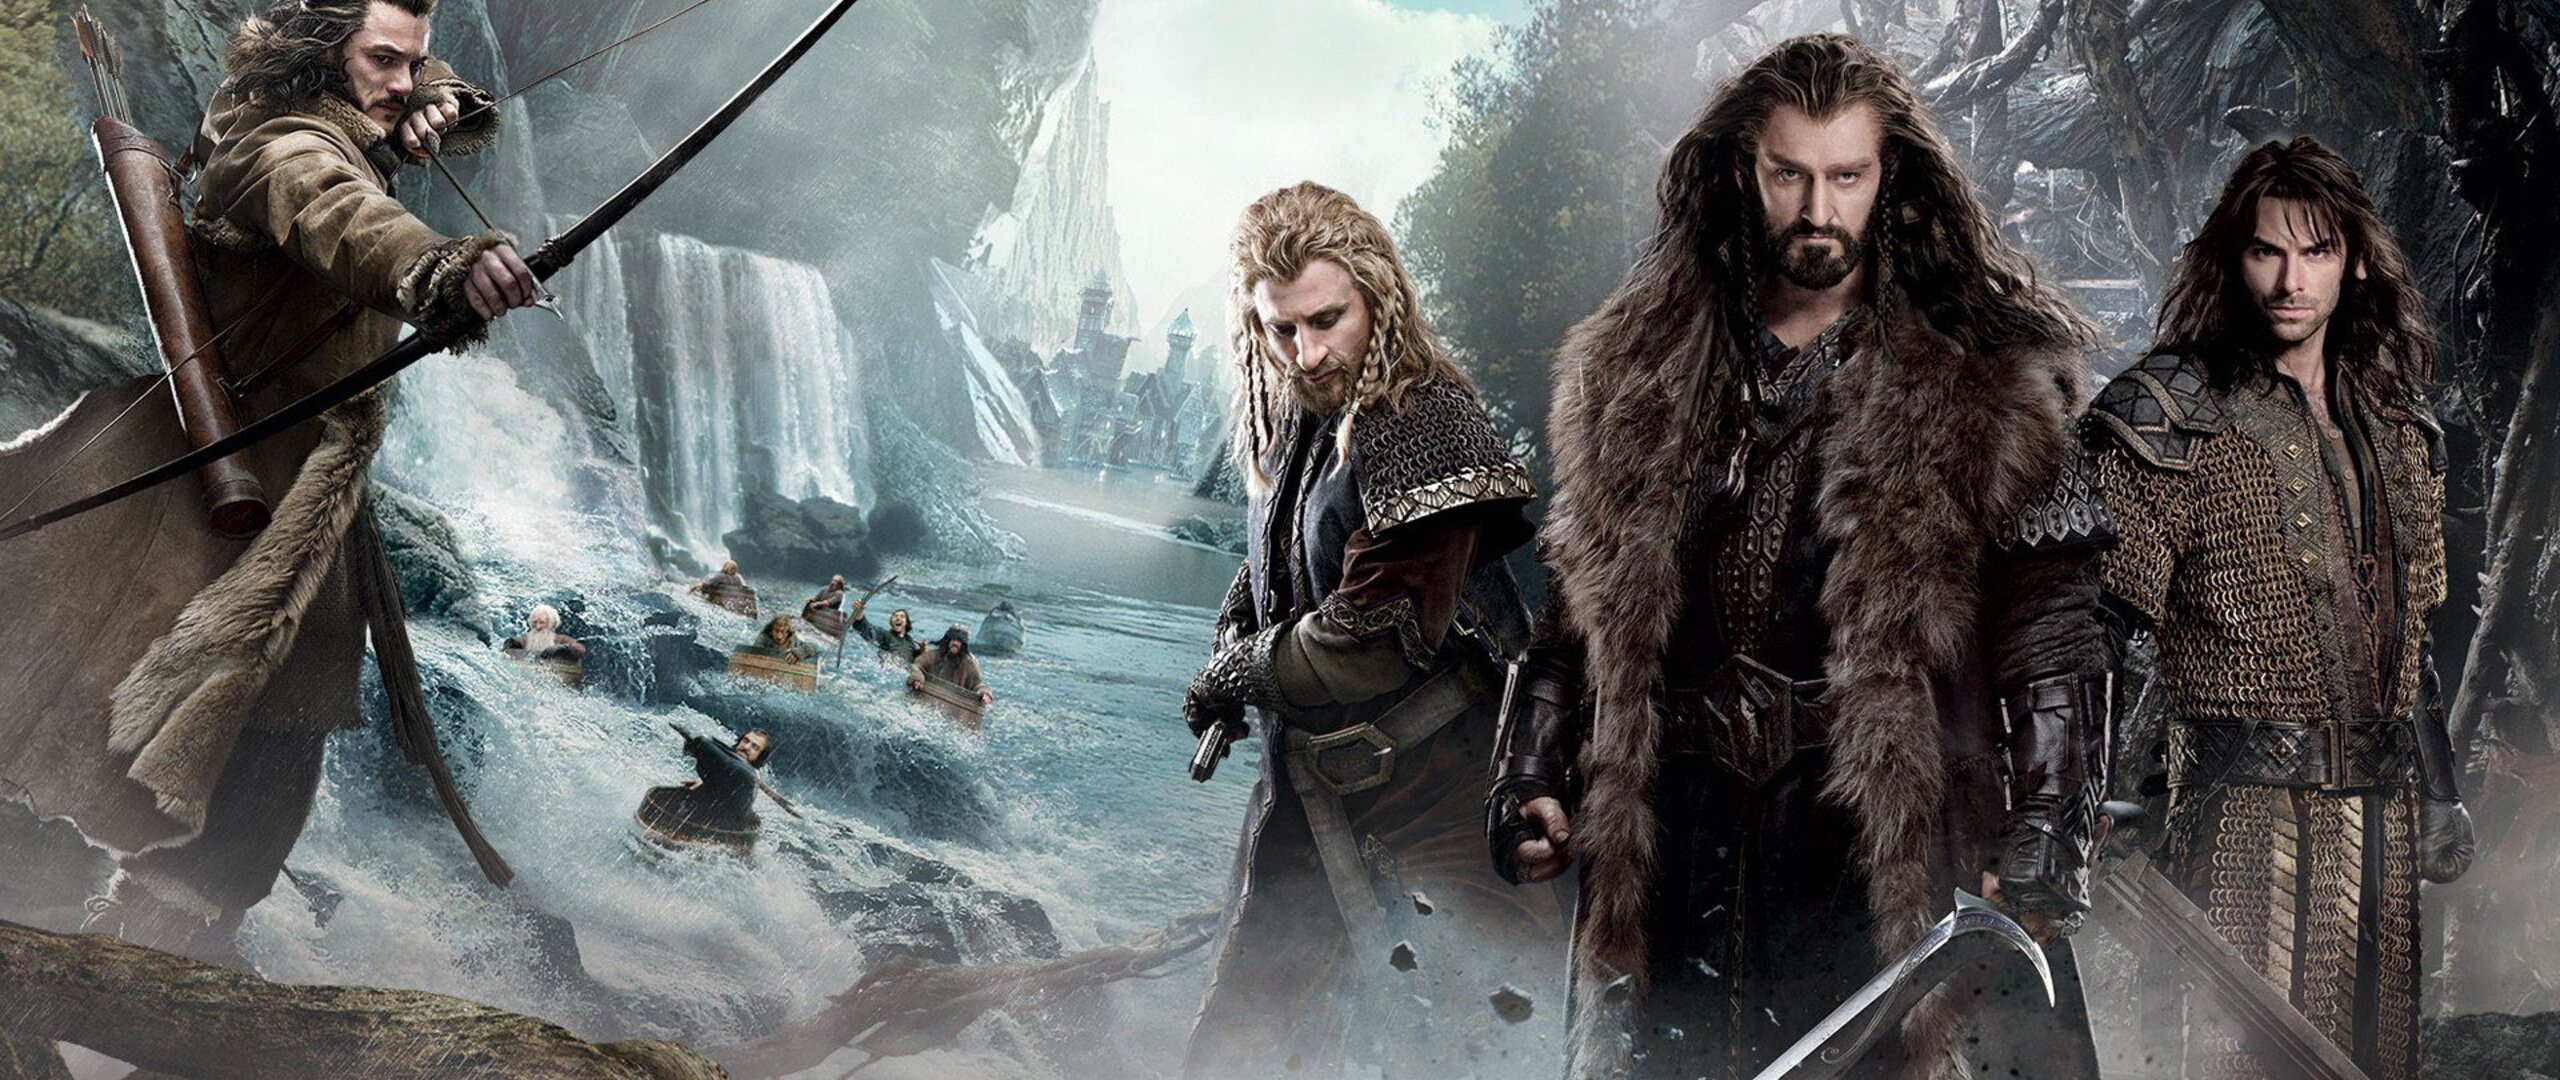 The Hobbit (Movie): The brothers Fili and Kili, The youngest of the thirteen Dwarves who set out with Thorin Oakenshield's company. 2560x1080 Dual Screen Background.